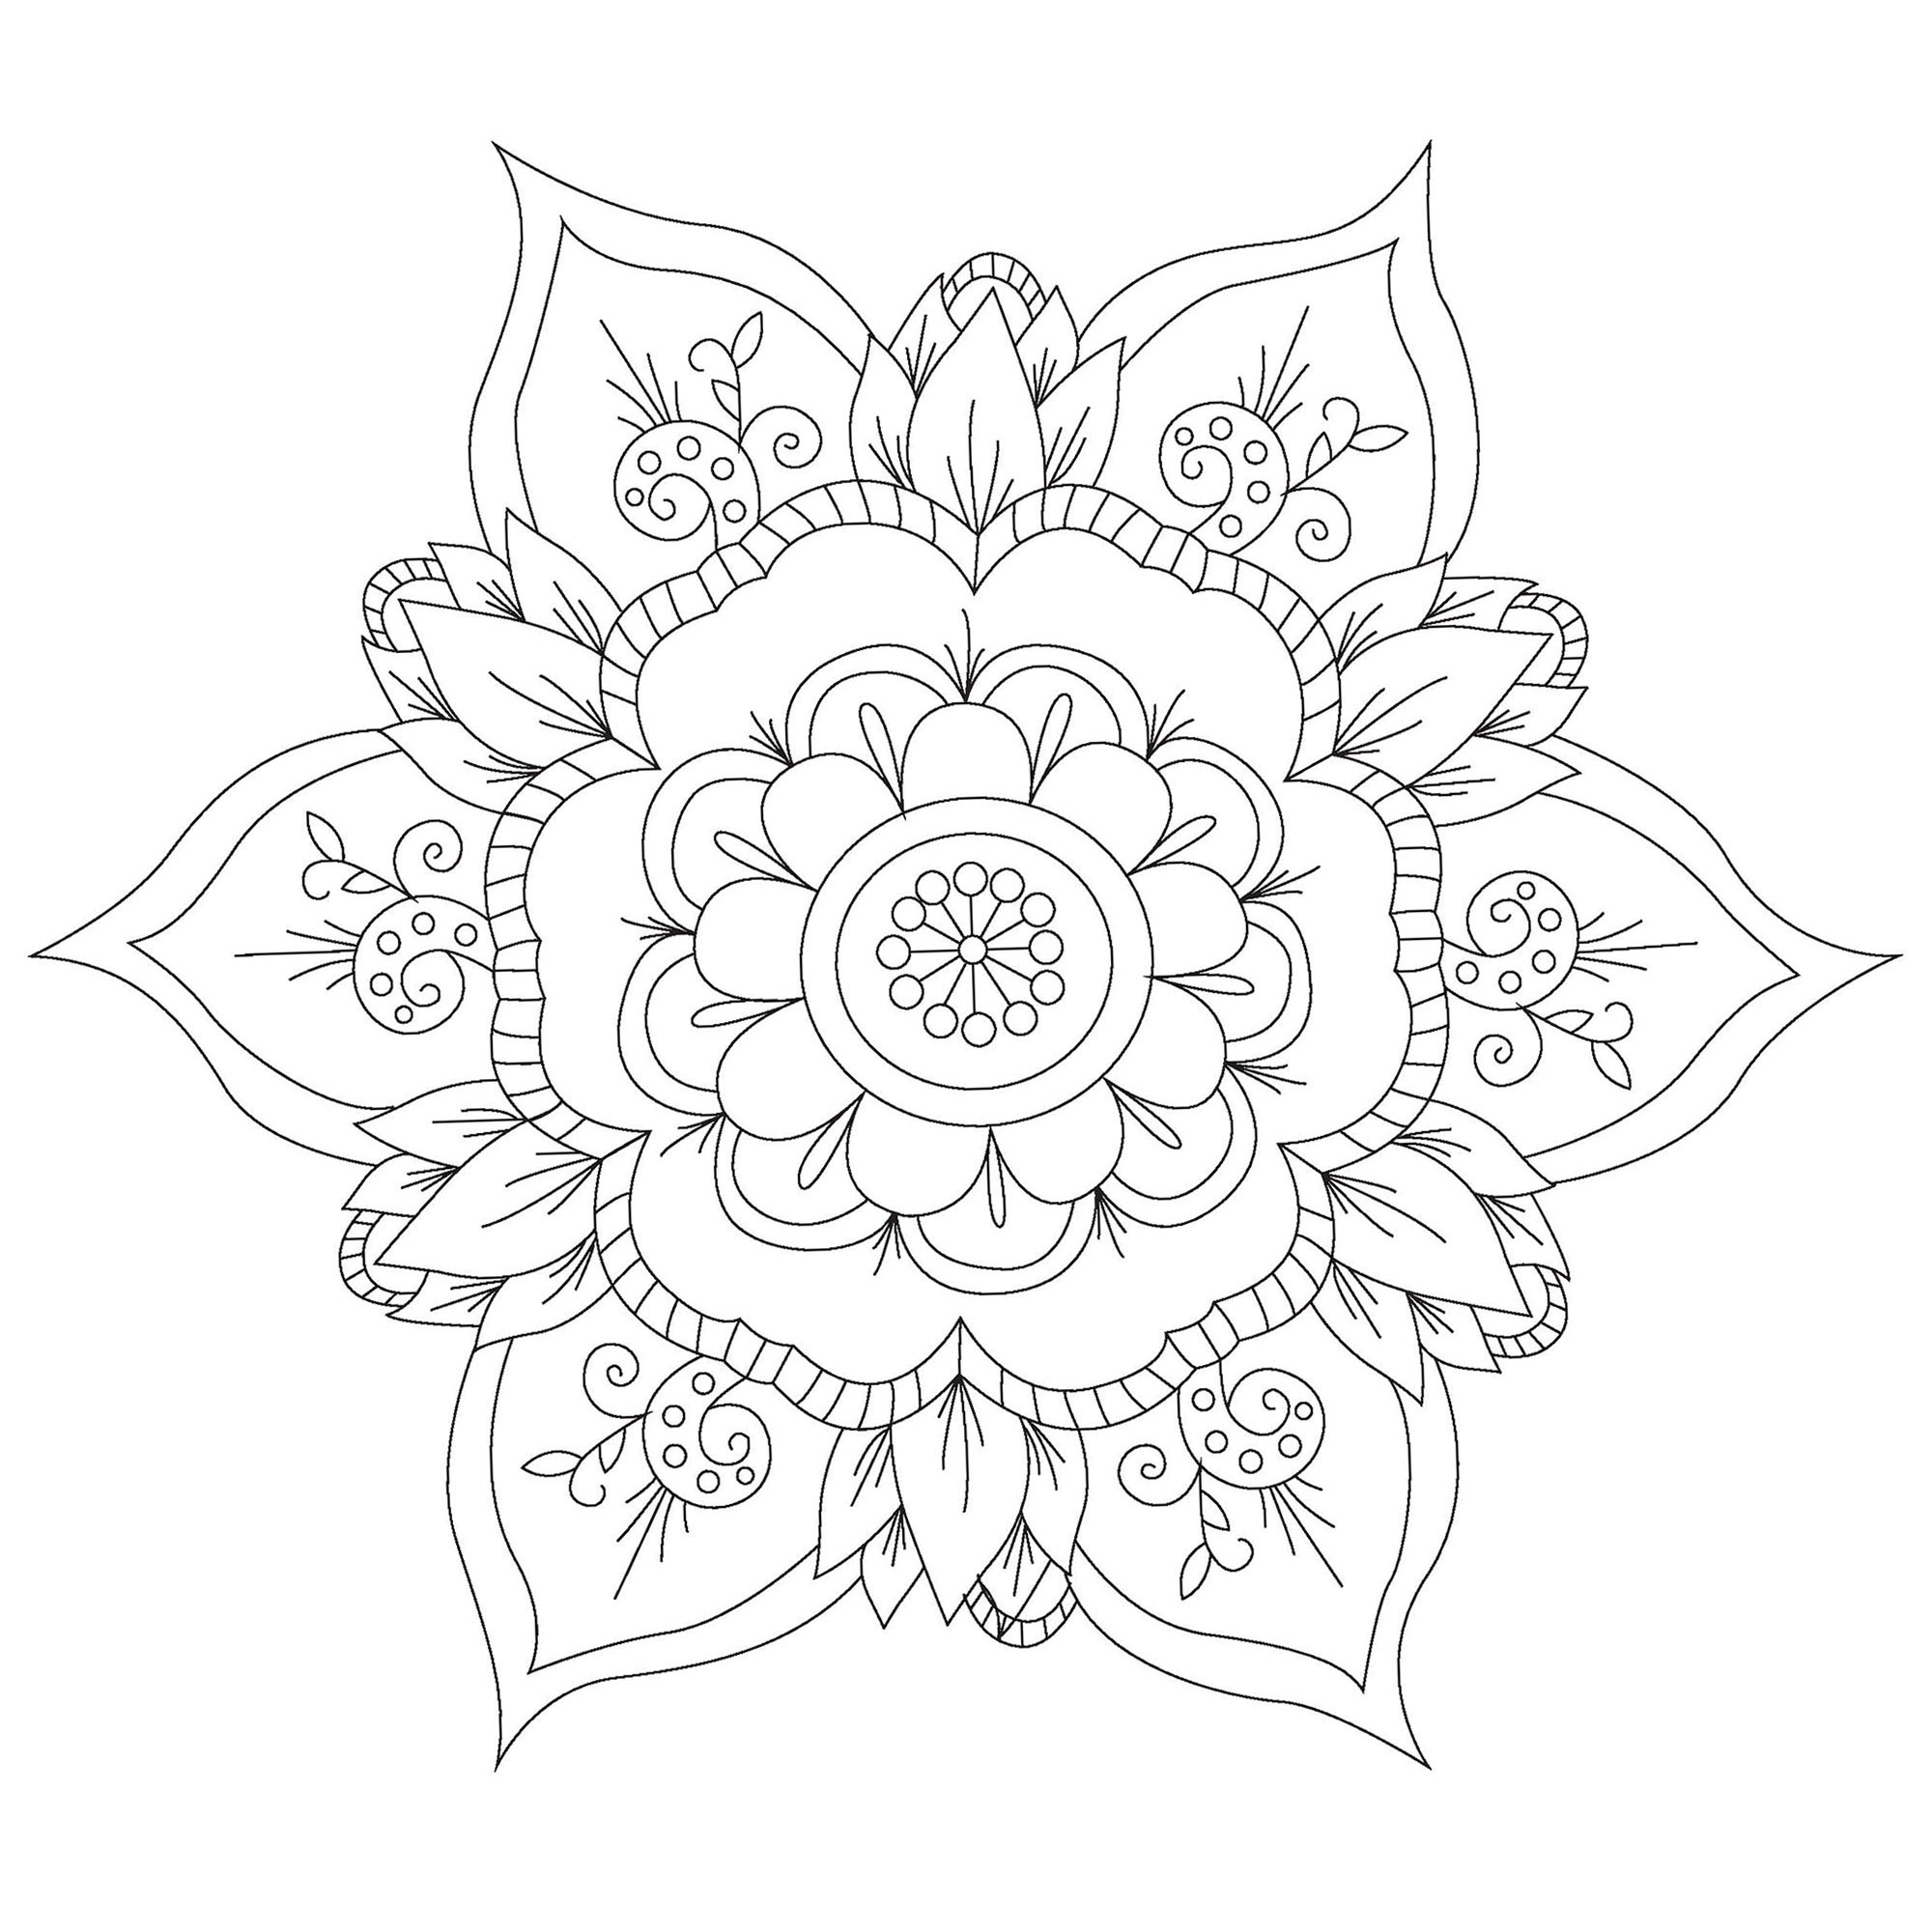 Pretty Mandala in the shape of flowers - Mandalas Kids Coloring Pages